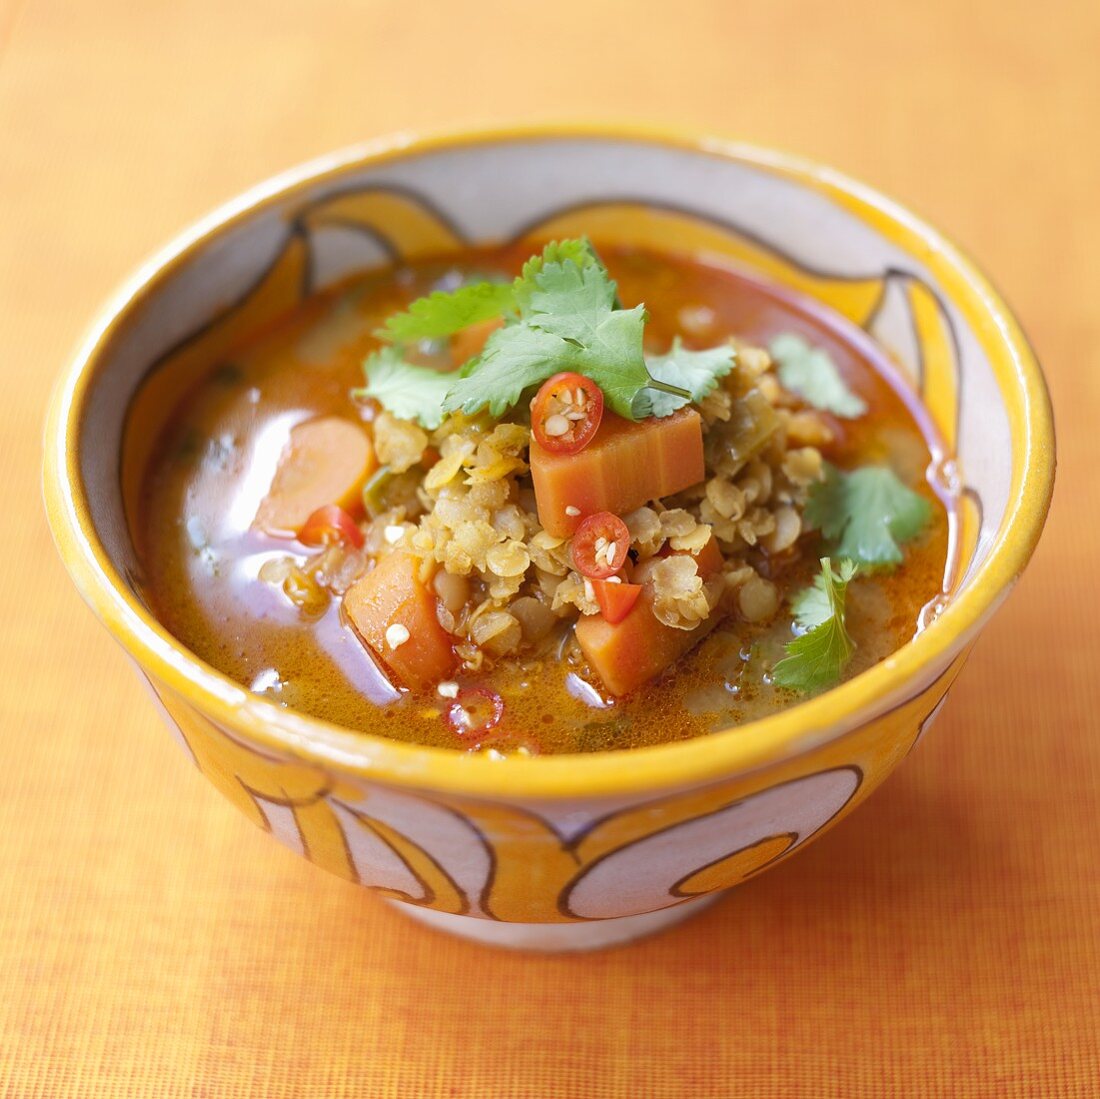 Vegetable soup with lentils and chilli